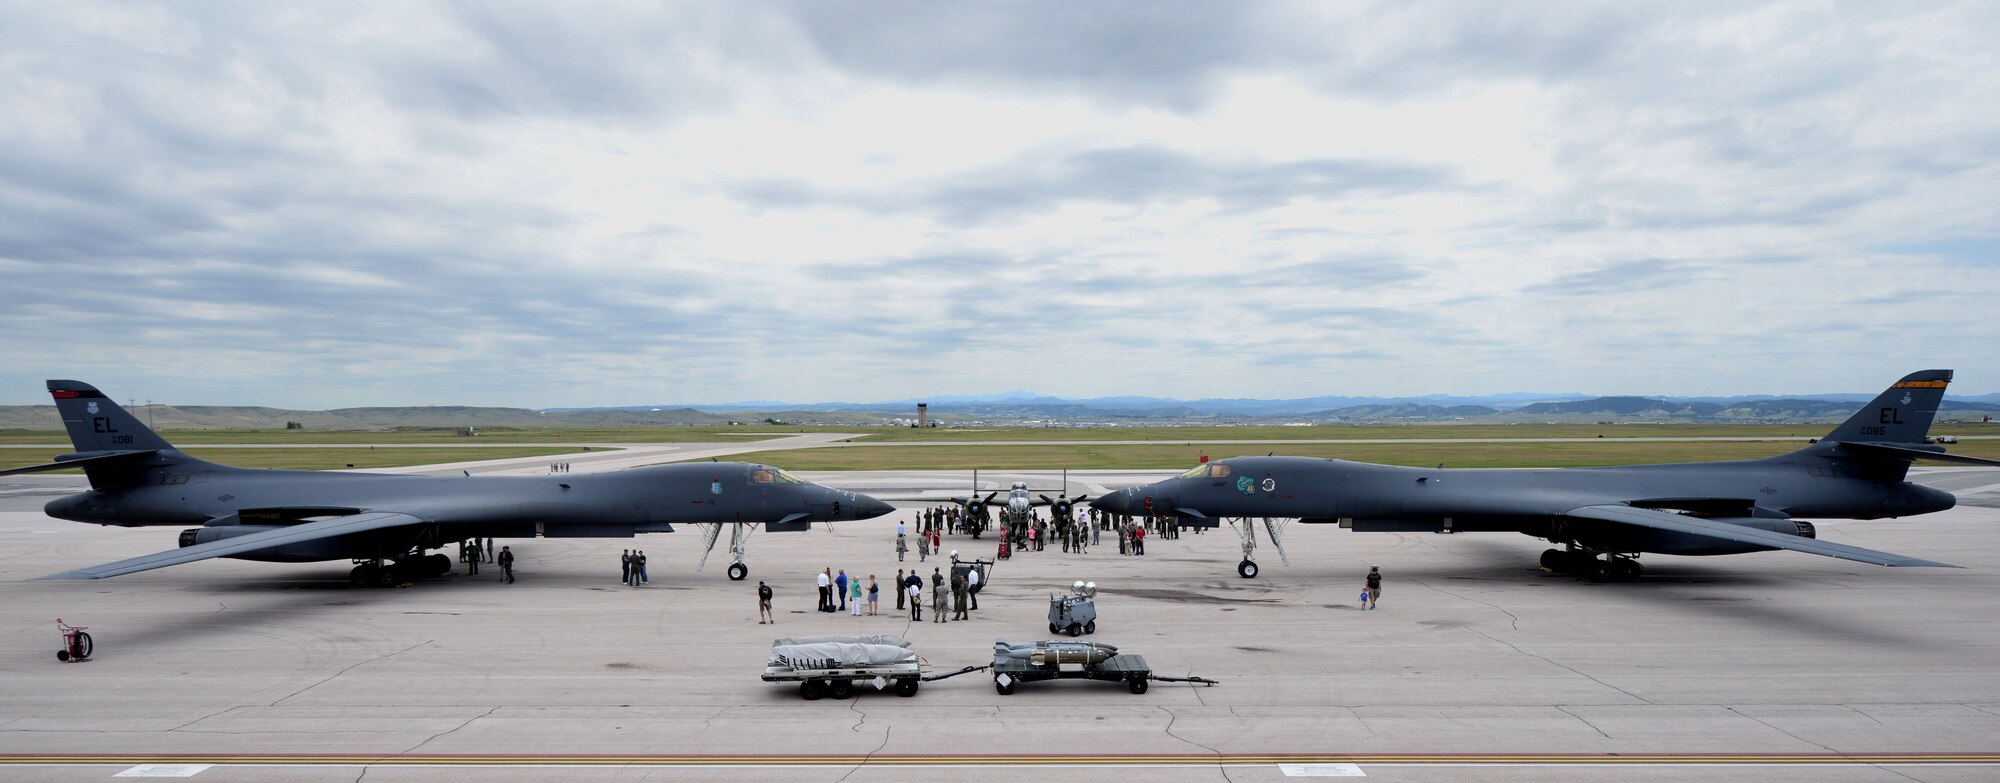 Airmen and their families attend a static display at Ellsworth Air Force Base, S.D., June 12, 2017. Two B-1 bombers, a B-52 Stratofortress and a B-25 Mitchell bomber were on display for the 100th birthday of the 34th and 37th Bomb Squadrons. (U.S. Air Force photo by Senior Airman Denise Jenson)